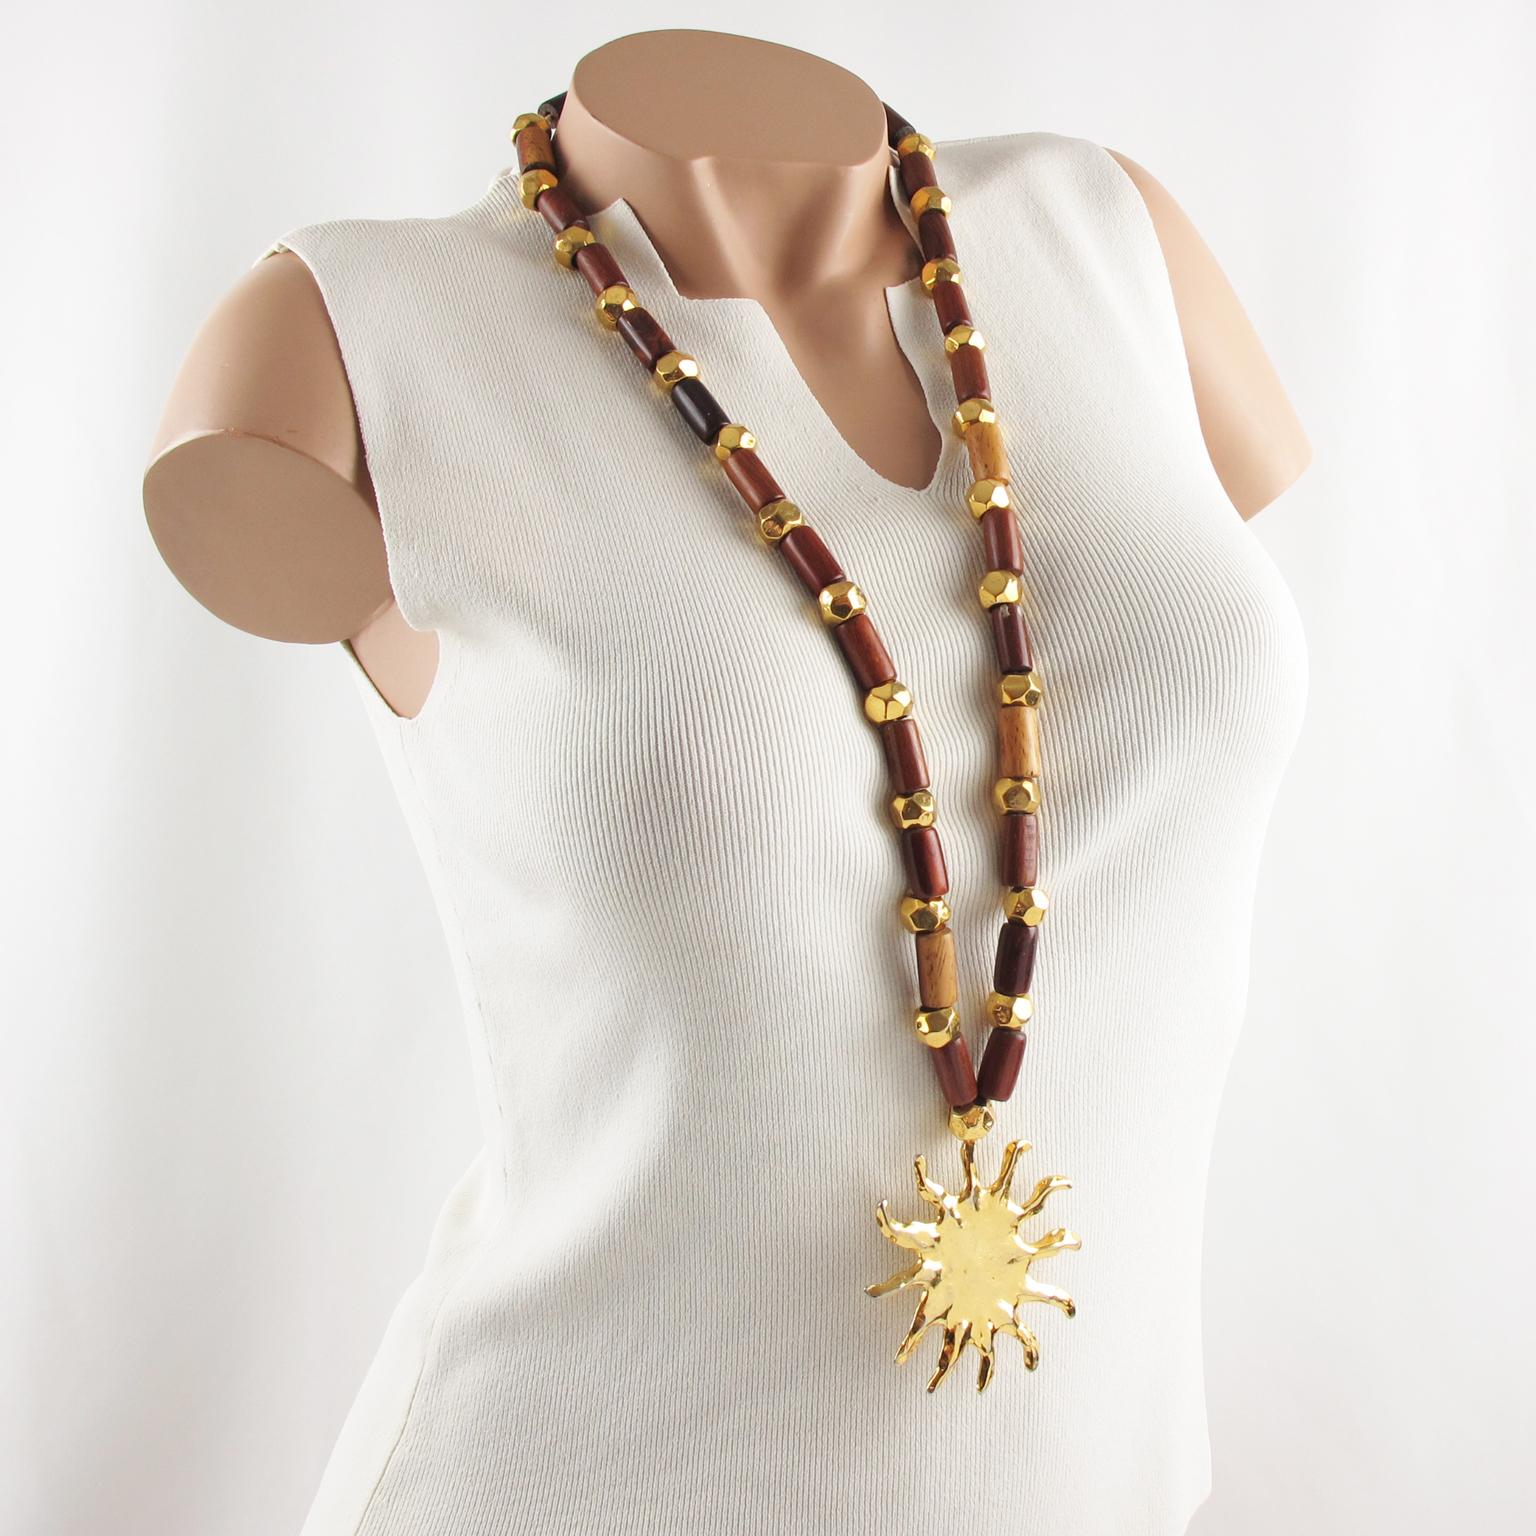 This stunning Edouard Rambaud Paris extra-long wood and metal pendant necklace features wood stick beads and gilt metal faceted beads ornate with a large shiny gilt metal medallion in a carved sun shape. There is no closing clasp, the necklace is